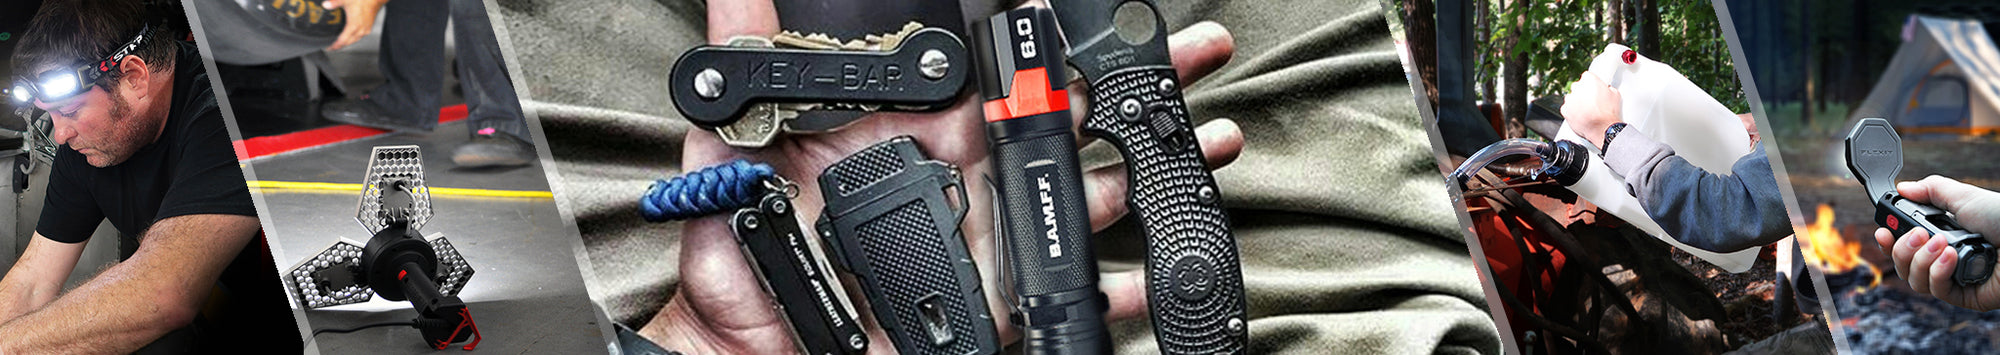 every day carry product collection banner featuring an STKR product lifestyle collage and an EDC pic in the middle that features a BAMFF Tactical Flashlight